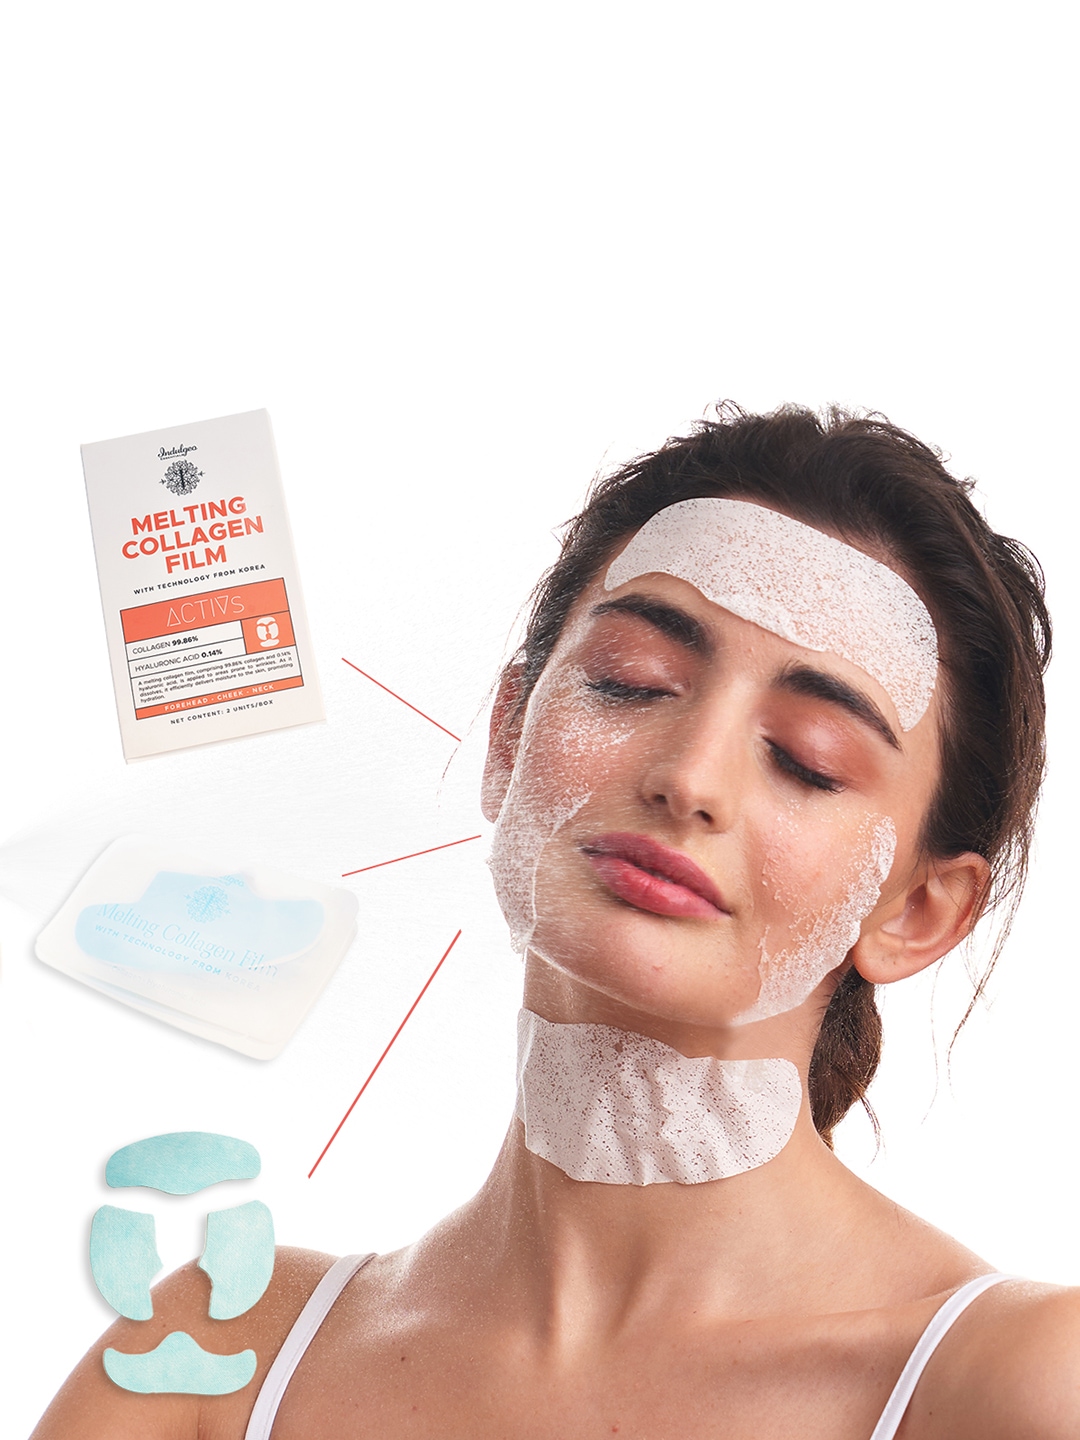 

Indulgeo Essentials Melting Collagen Film Patches For Face - 2 Units/ 8Pcs, White